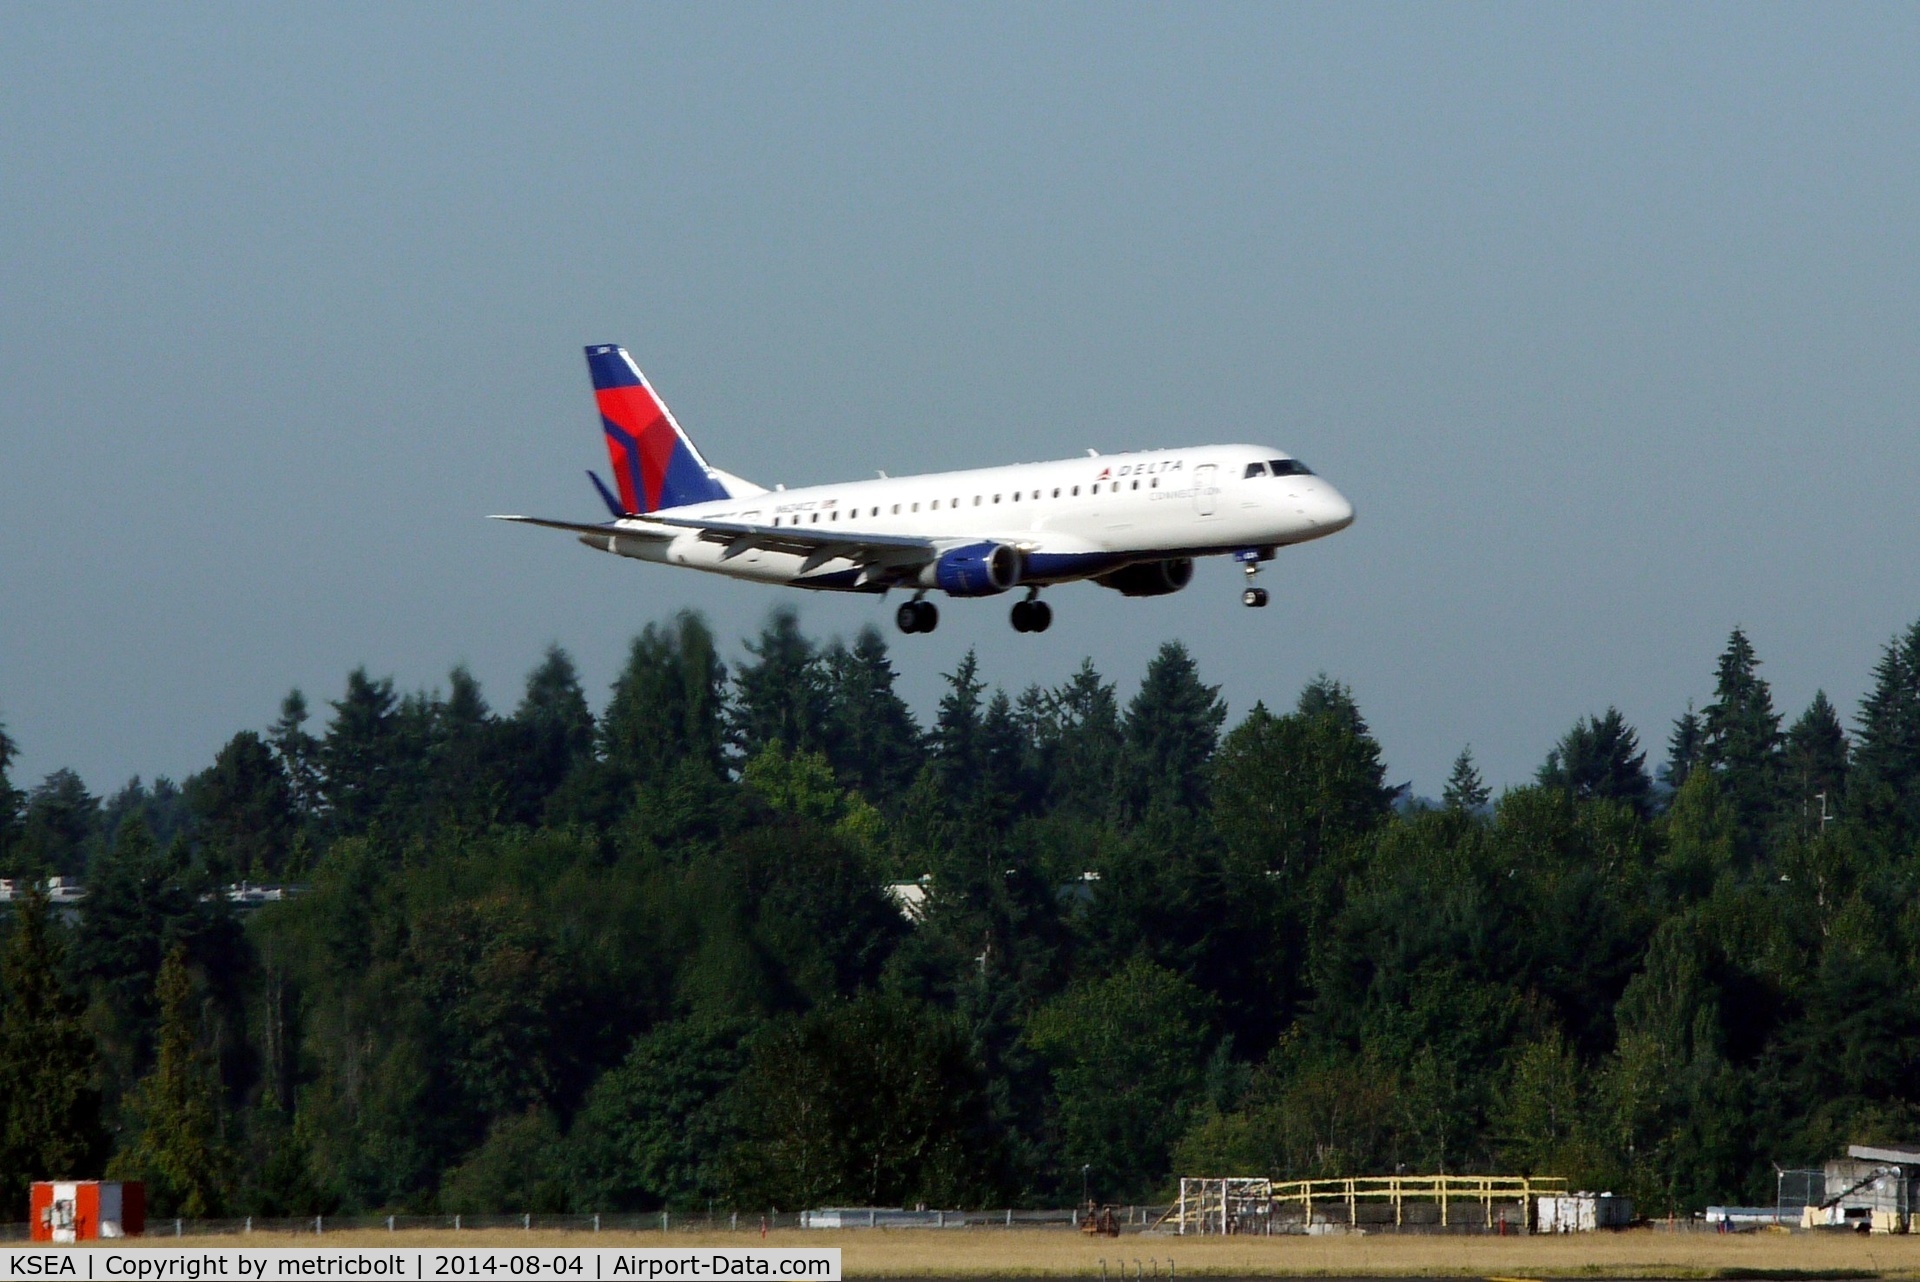 Seattle-tacoma International Airport (SEA) - Delta Embraer landing in Seattle